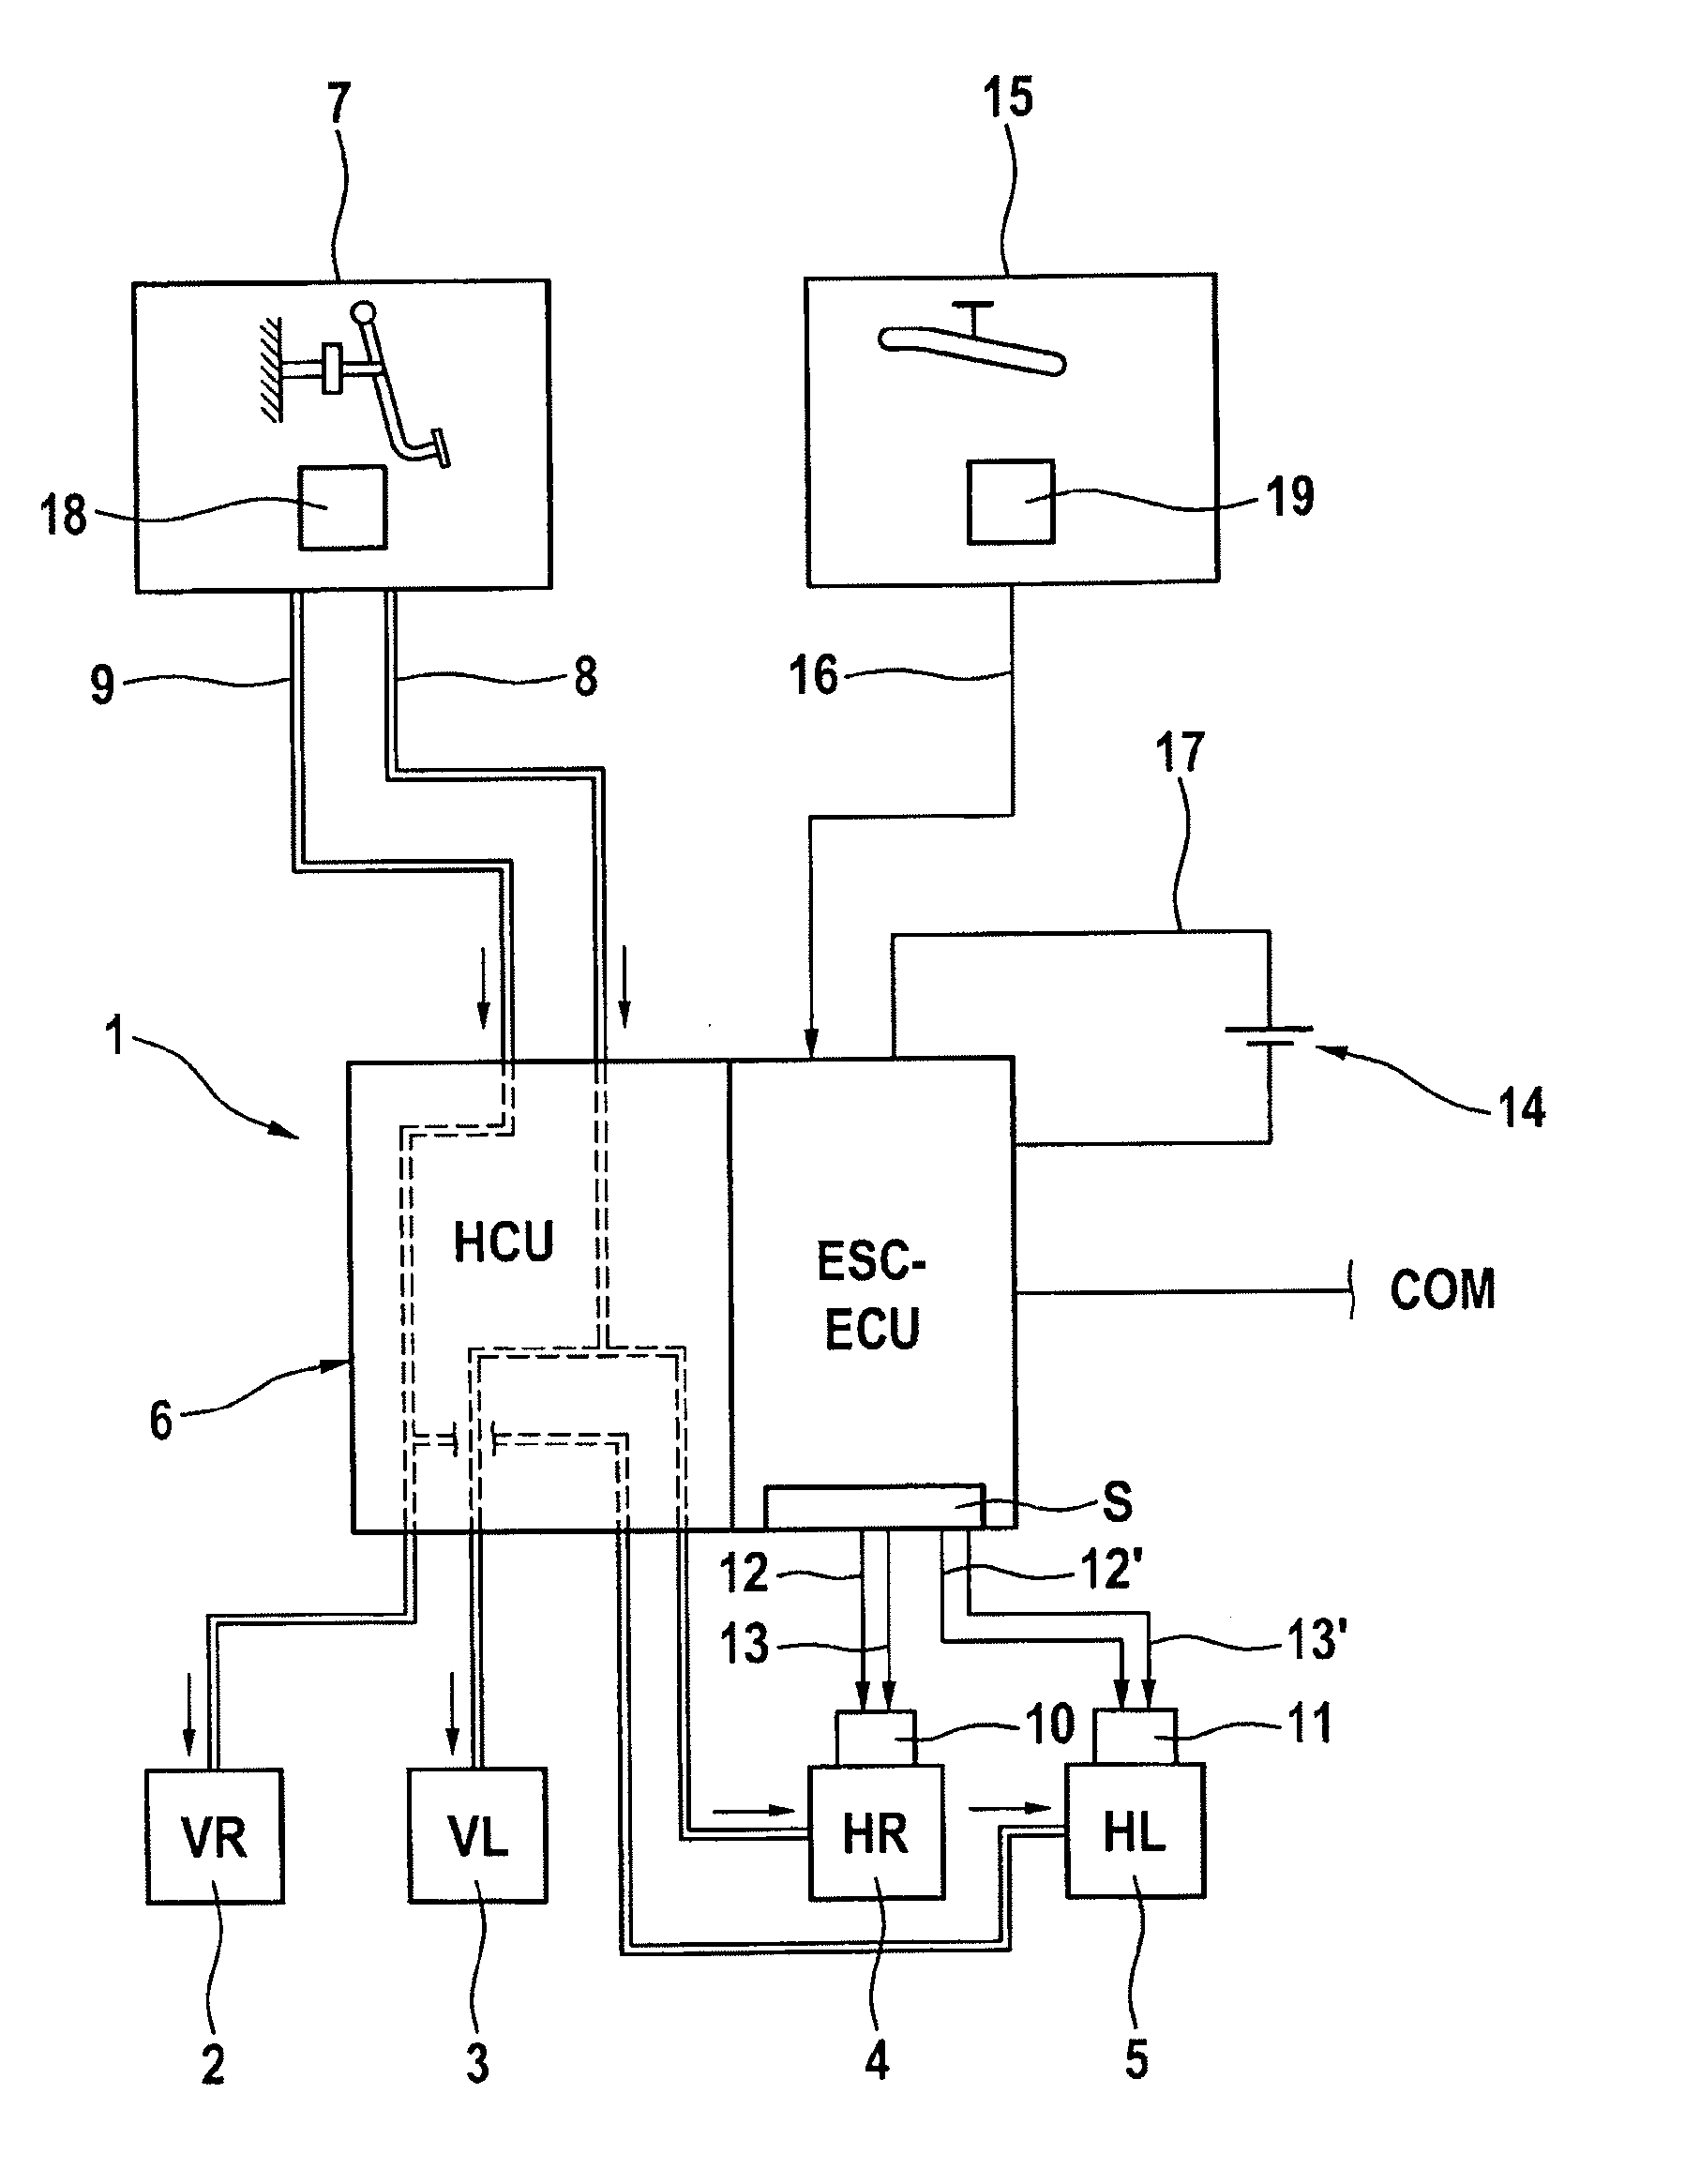 Operating method for a motor vehicle comprising in particular an electronically controlled parking brake system